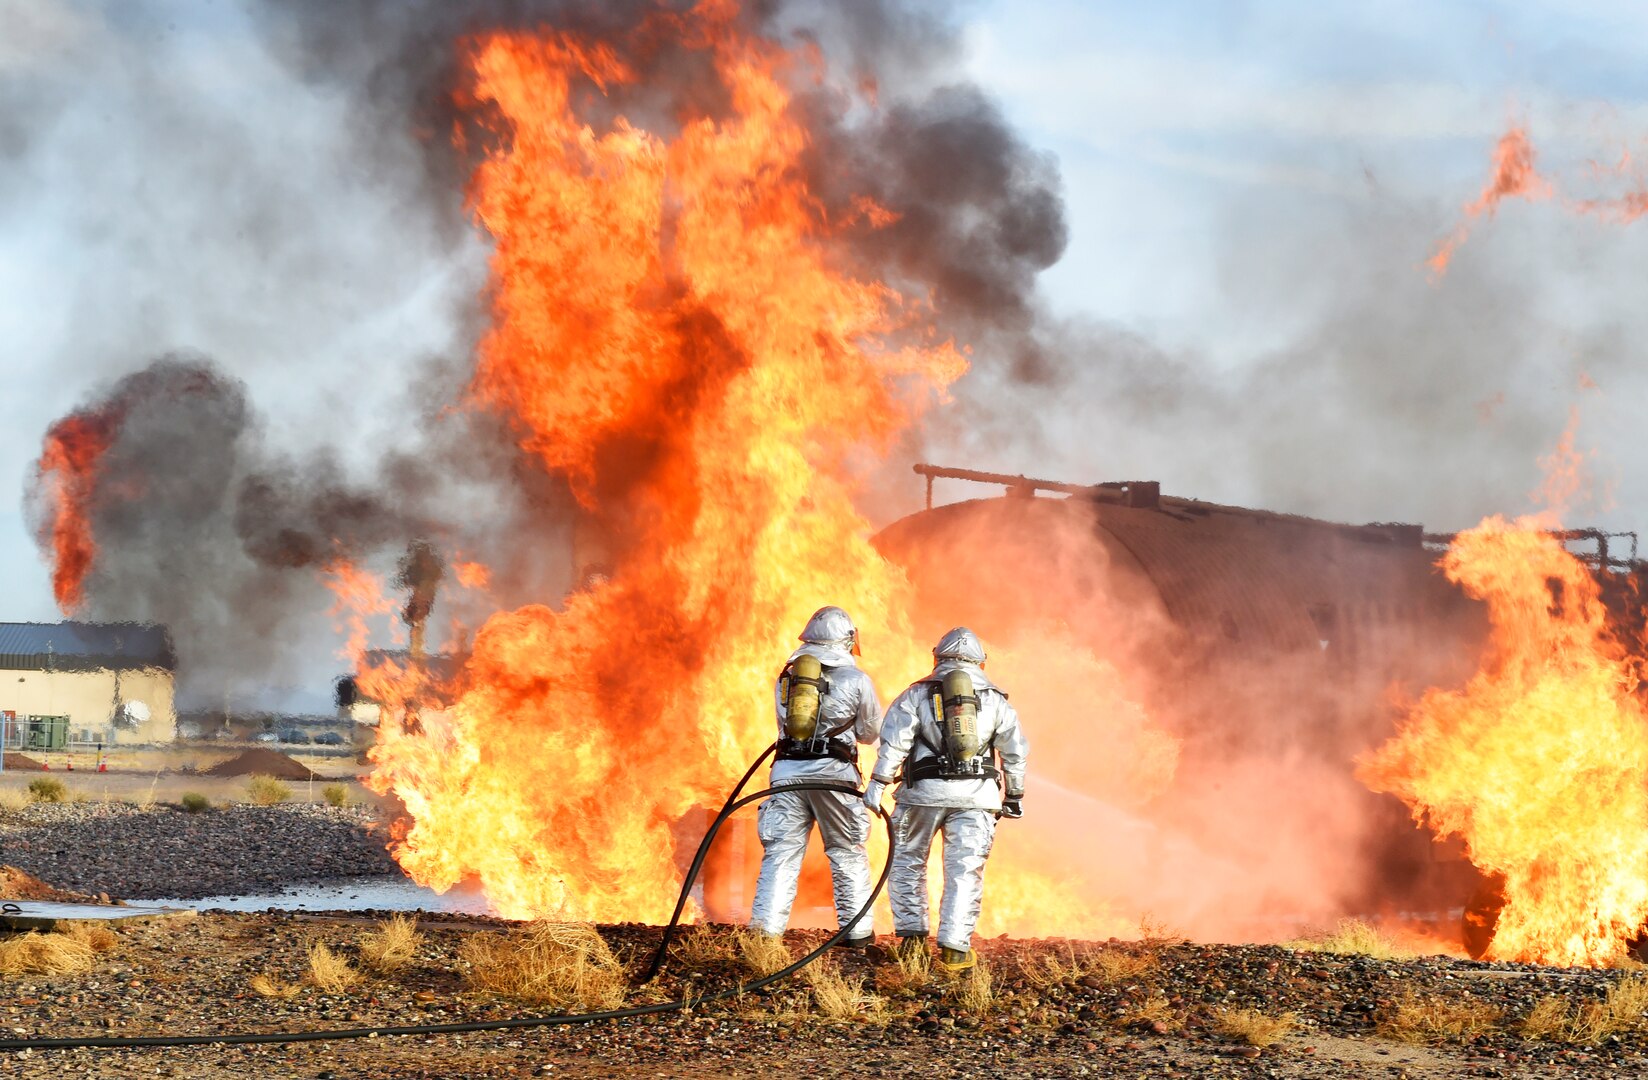 Firefighters with the 56th Civil Engineer Squadron and Gila Bend Fire Department spray water onto a fire during training Dec. 7, 2016, at Luke Air Force Base, Ariz.